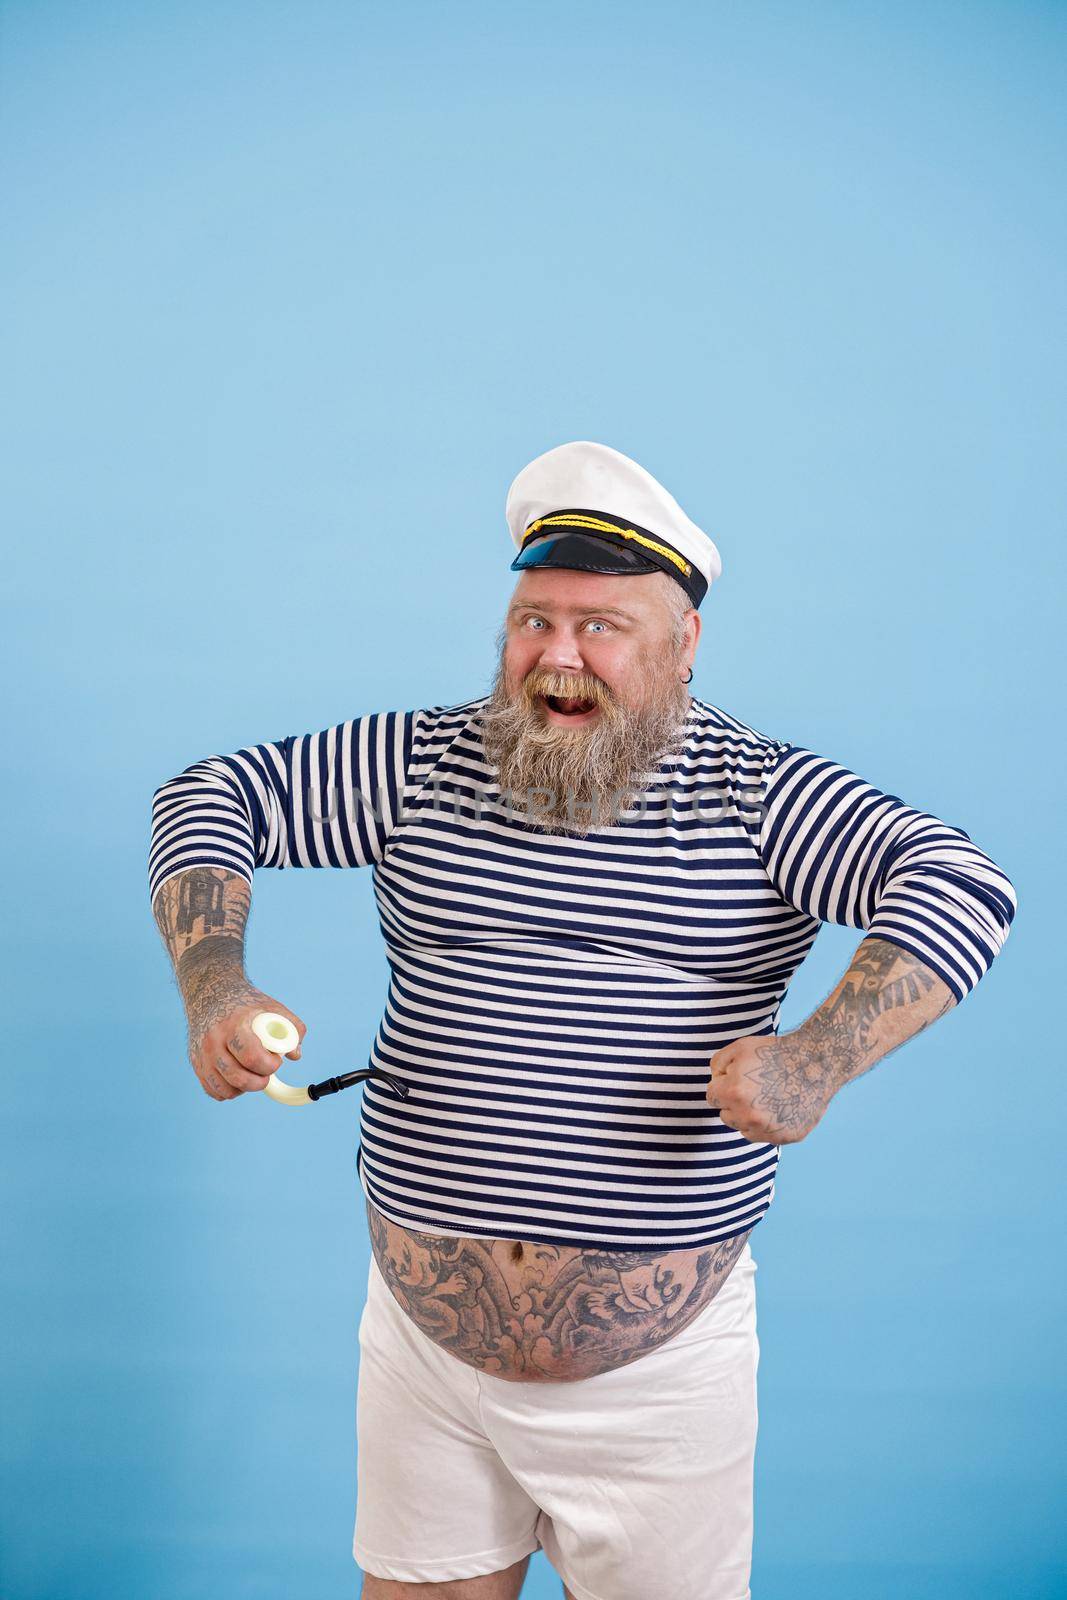 Funny dashing bearded plus size person wearing sailor costume with smoking pipe poses on light blue background in studio